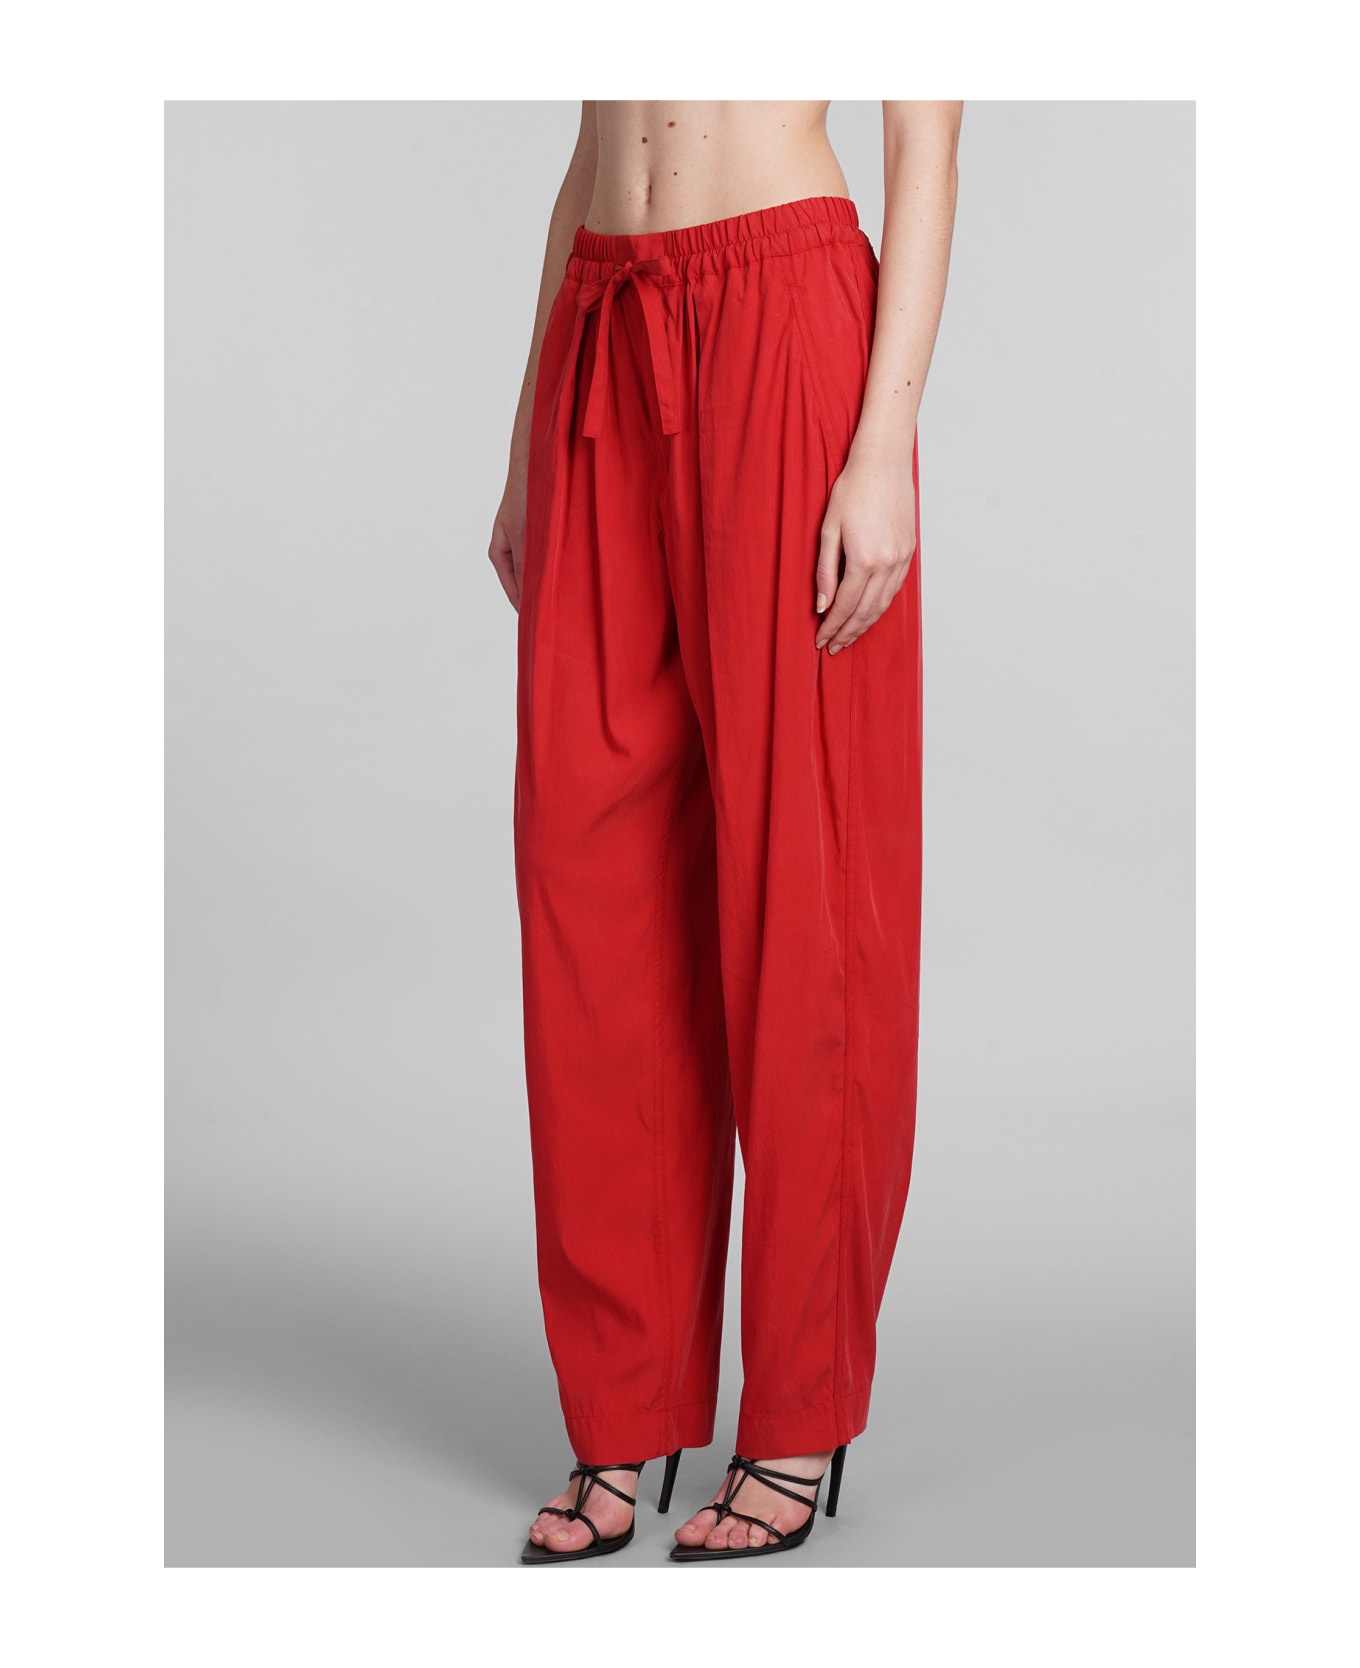 Isabel Marant Hectorina Pants In Red Wool And Polyester - red ボトムス